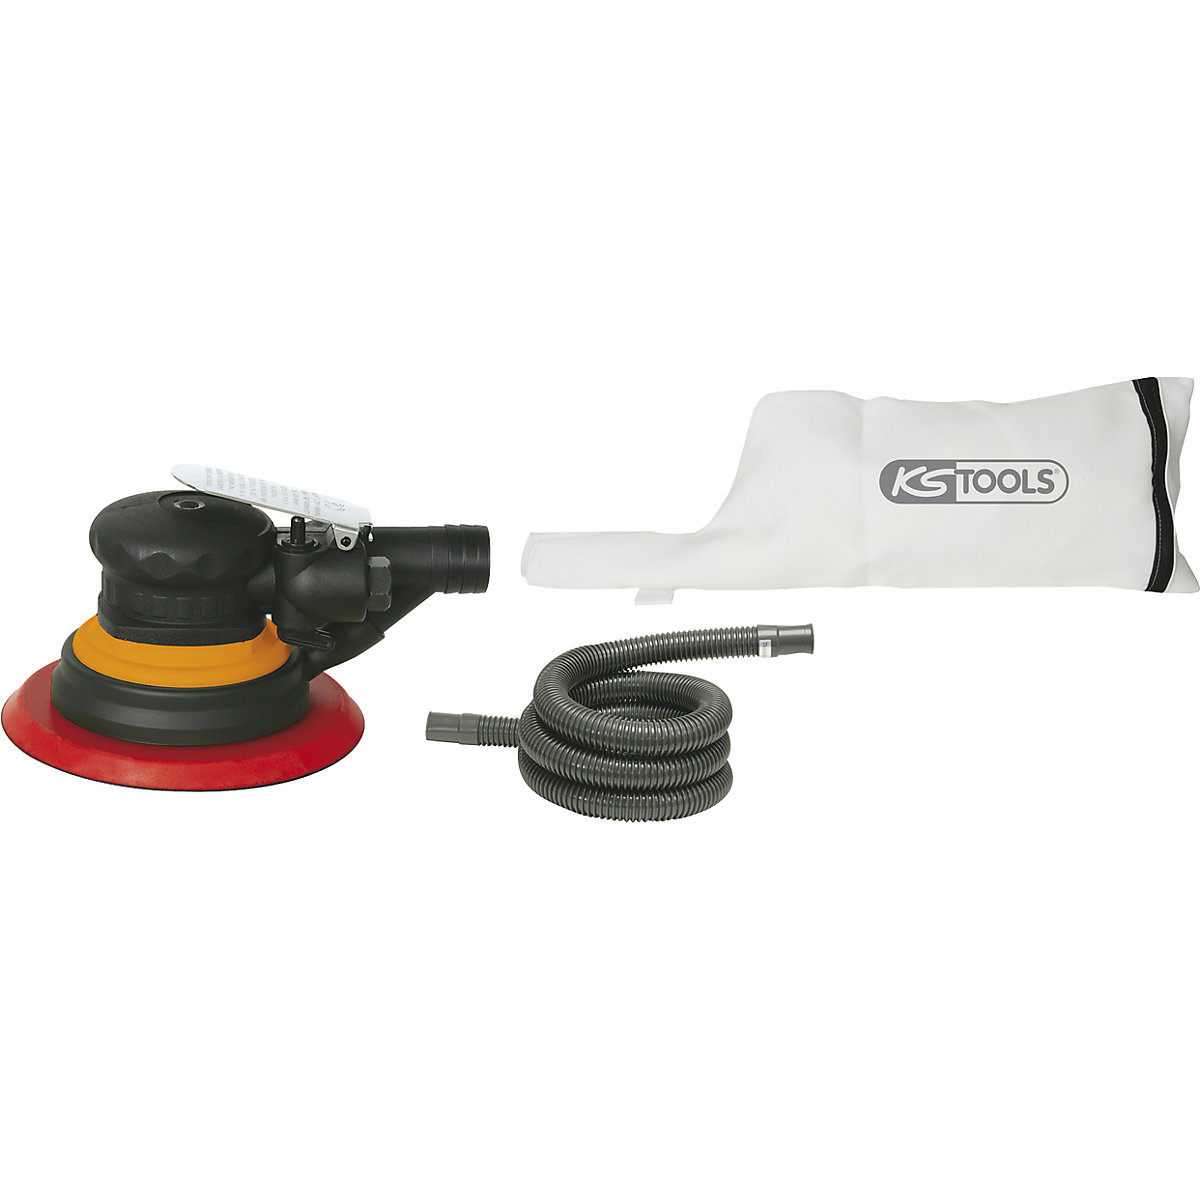 Pneumatic eccentric sander with dust extraction – KS Tools